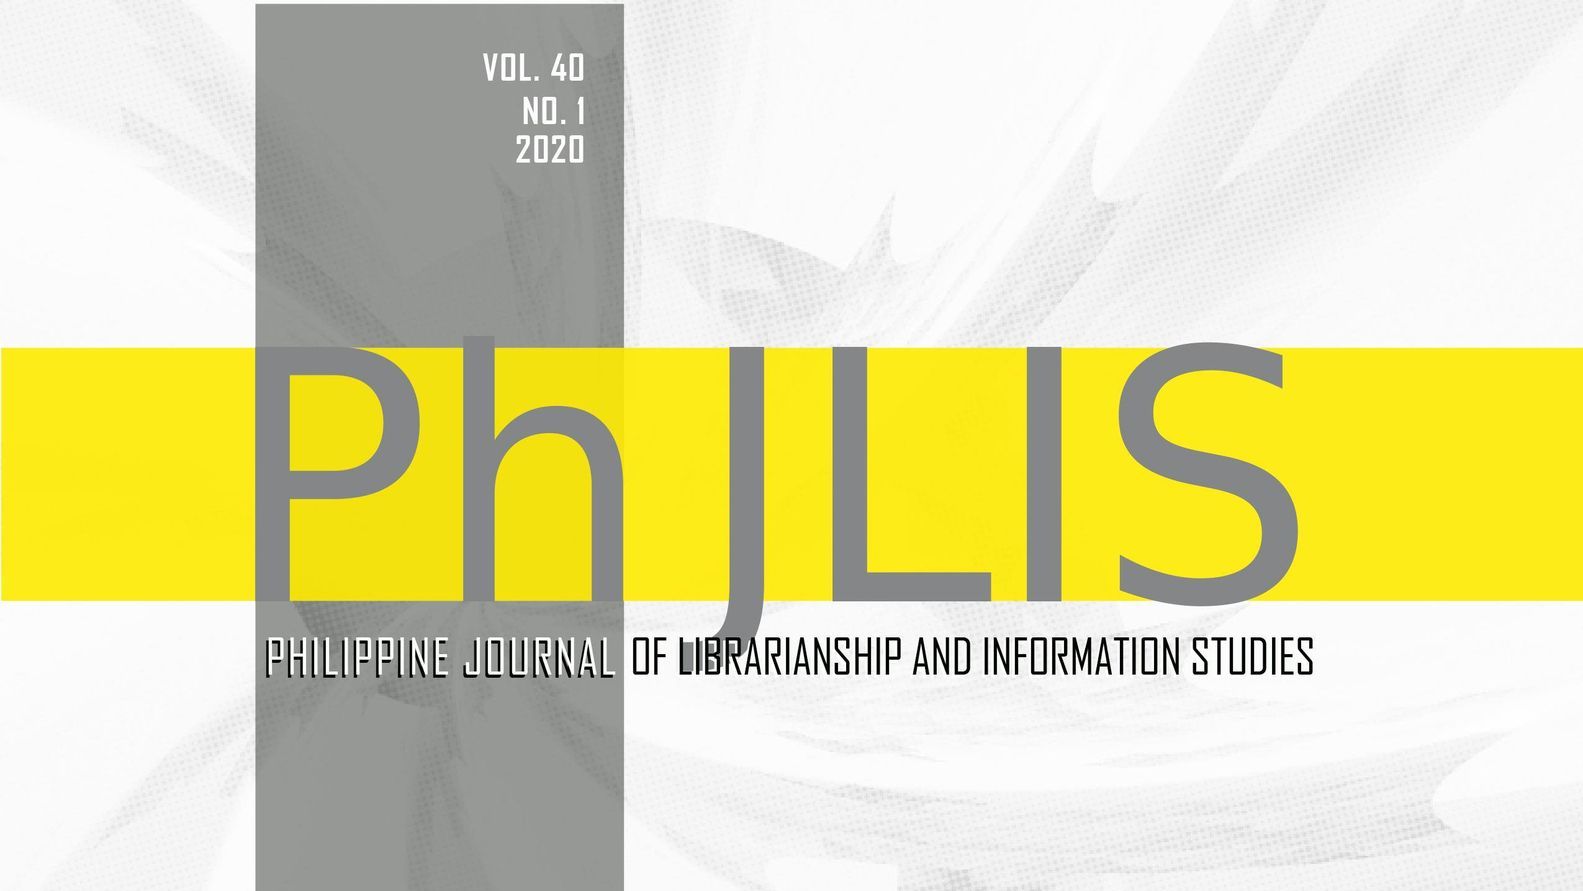 New Issue of the Philippine Journal of Librarianship and Information Studies - Vol. 40, No. 1 (2020)